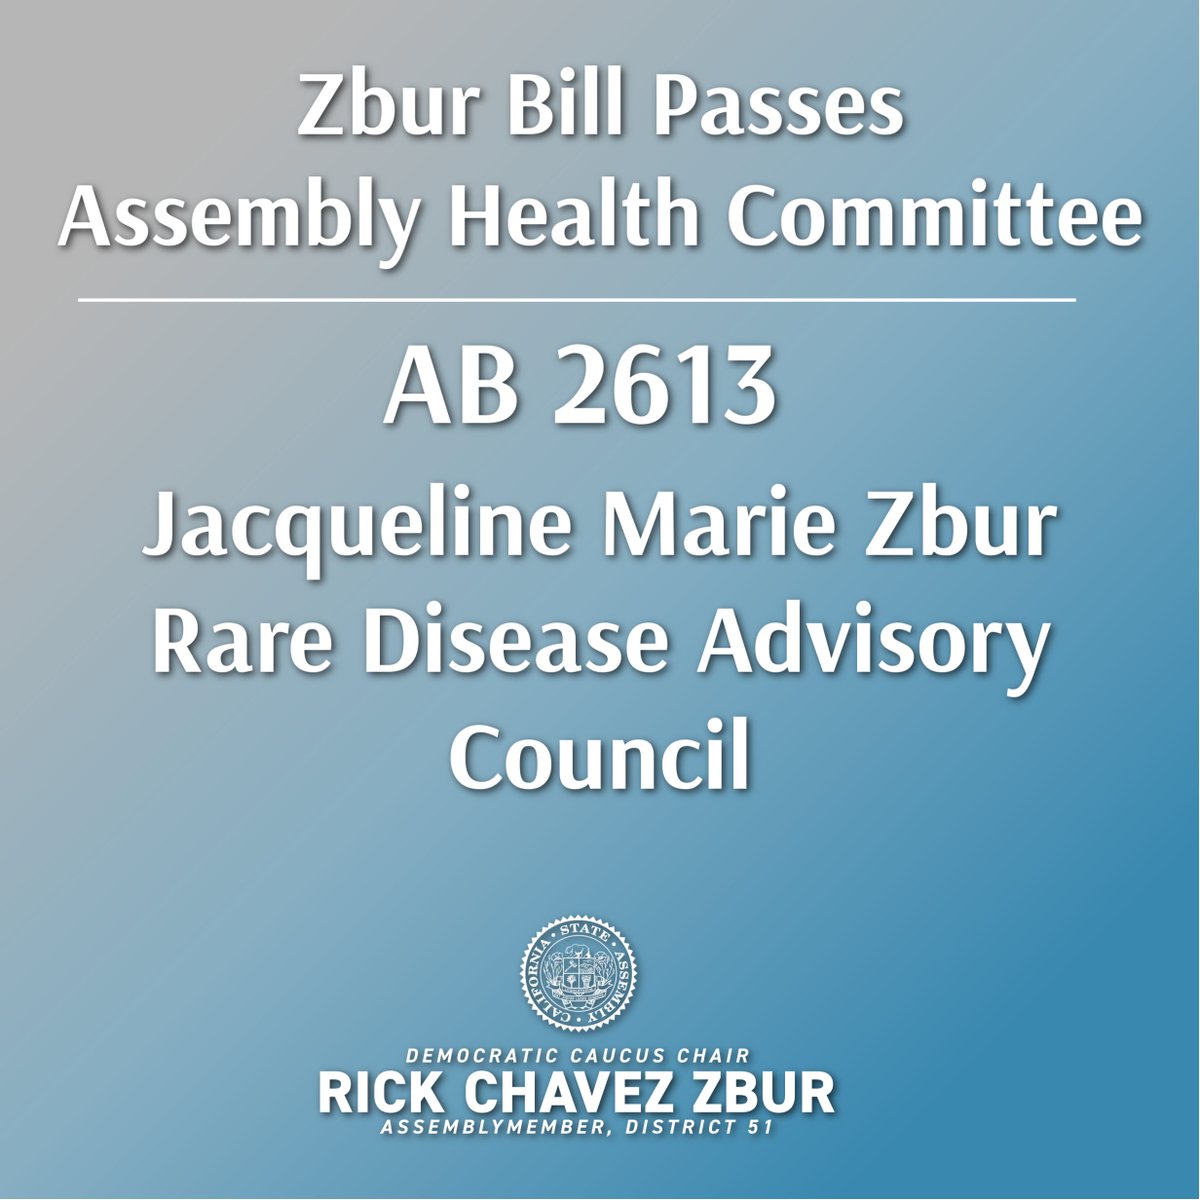 (1/2) In 2020, my beloved sister Jackie died from ALS. Although bittersweet, I am proud to announce that #AB2613, my bill to create a Rare Disease Advisory Council - named in my sister's memory - has cleared the Assembly Health Committee.